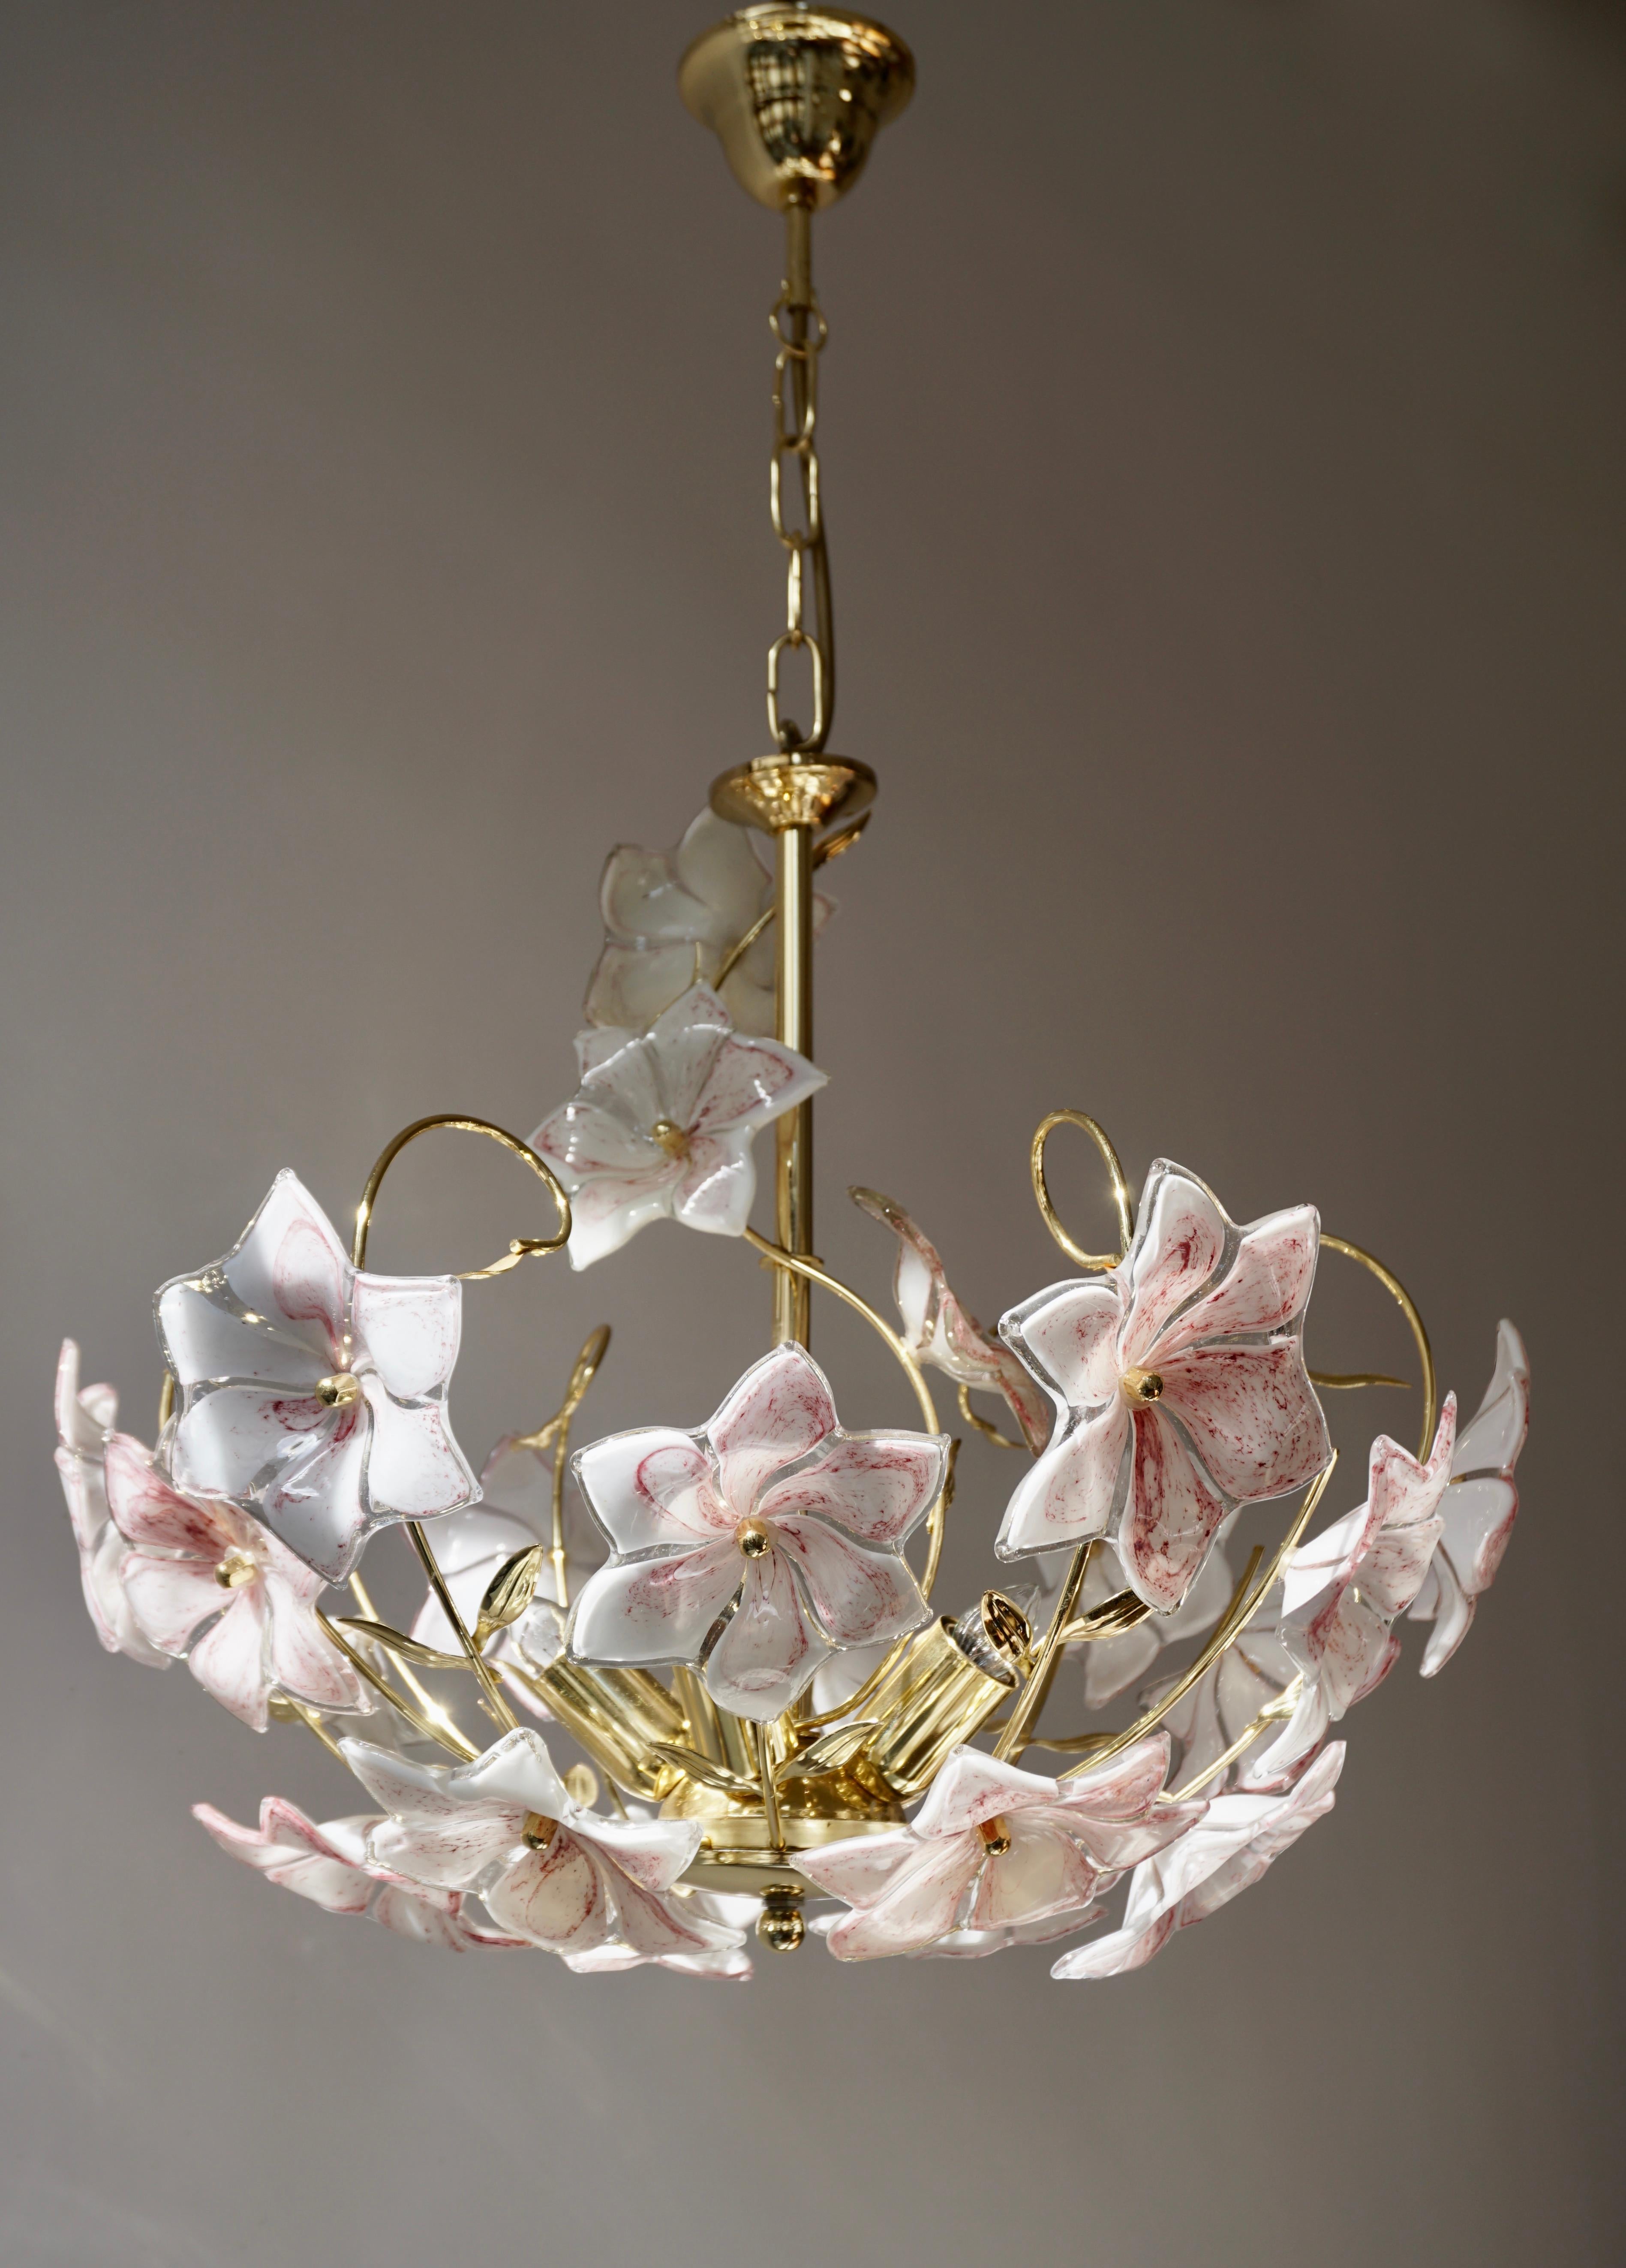 Italian brass chandelier whit white pink Murano colored glass flowers. 
The light requires five single E14 screw fit lightbulbs (40Watt max.)
Diameter 50 cm.
Height fixture 44 cm.
The total height is 65 cm with the chain. (Can be shortened).
  